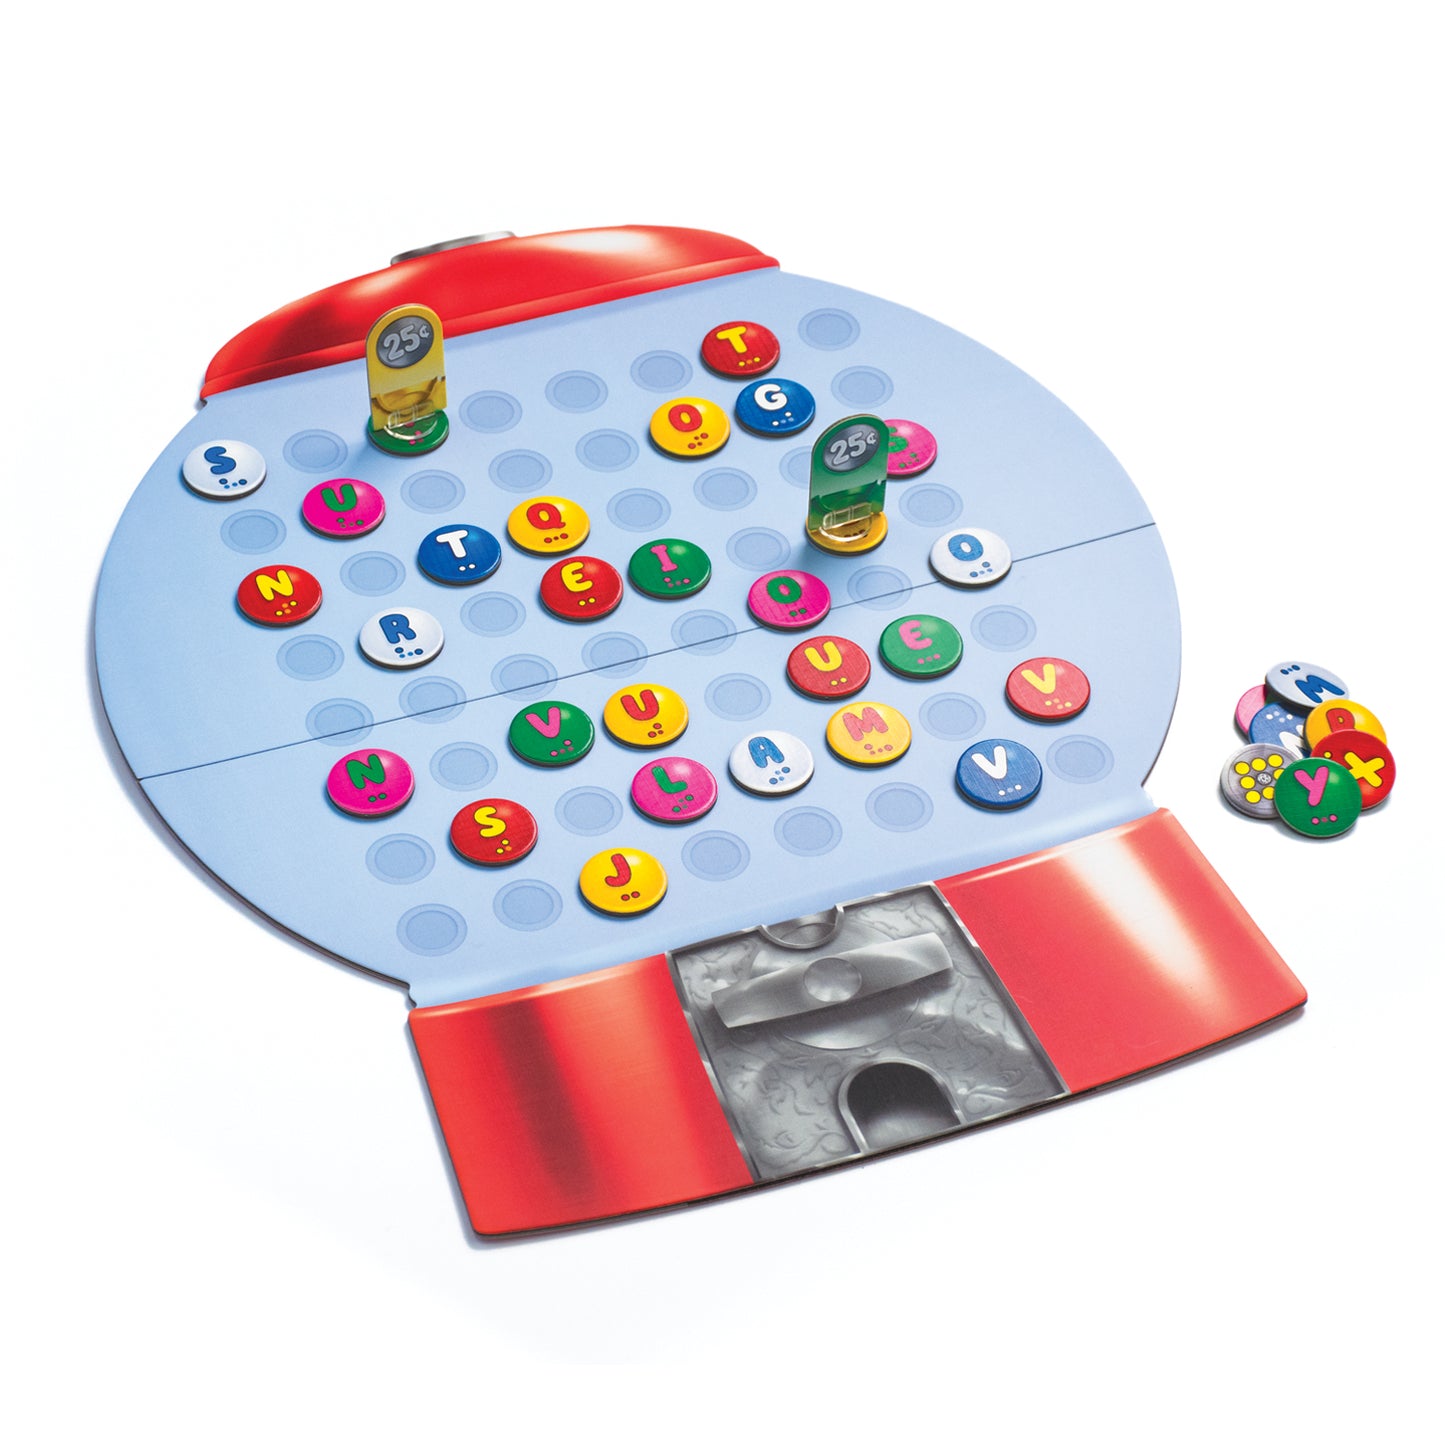 Gumball Words Board Game-Gumball Machine Spelling Game